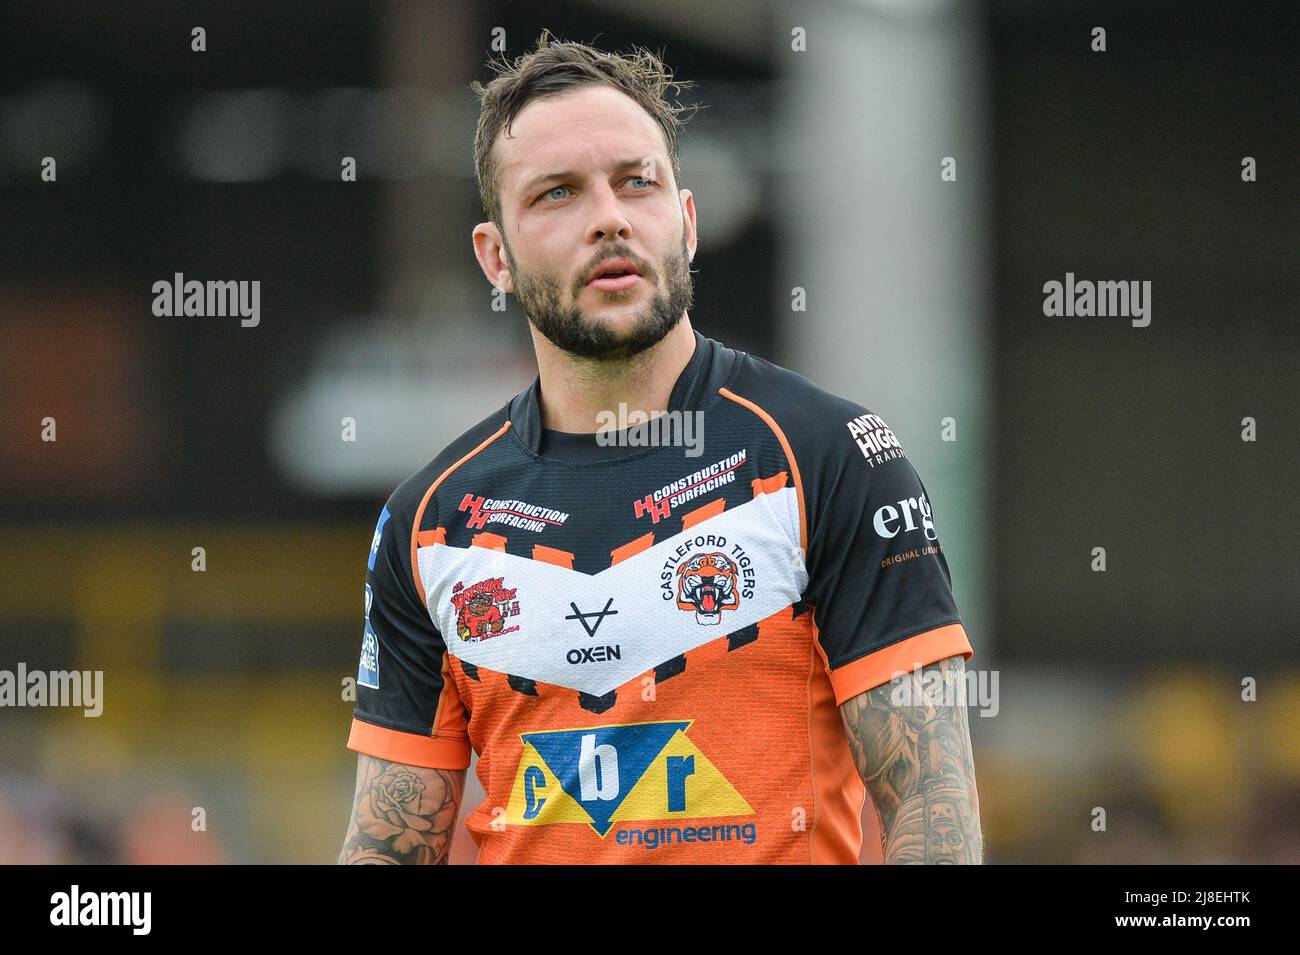 Castleford, England - 15th May 2022 - Gareth O'Brien of Castleford Tigers. Rugby League Betfred Super League  Castleford Tigers vs Hull Kingston Rovers at The Mend-A-Hose Stadium, Castleford, UK  Dean Williams Stock Photo